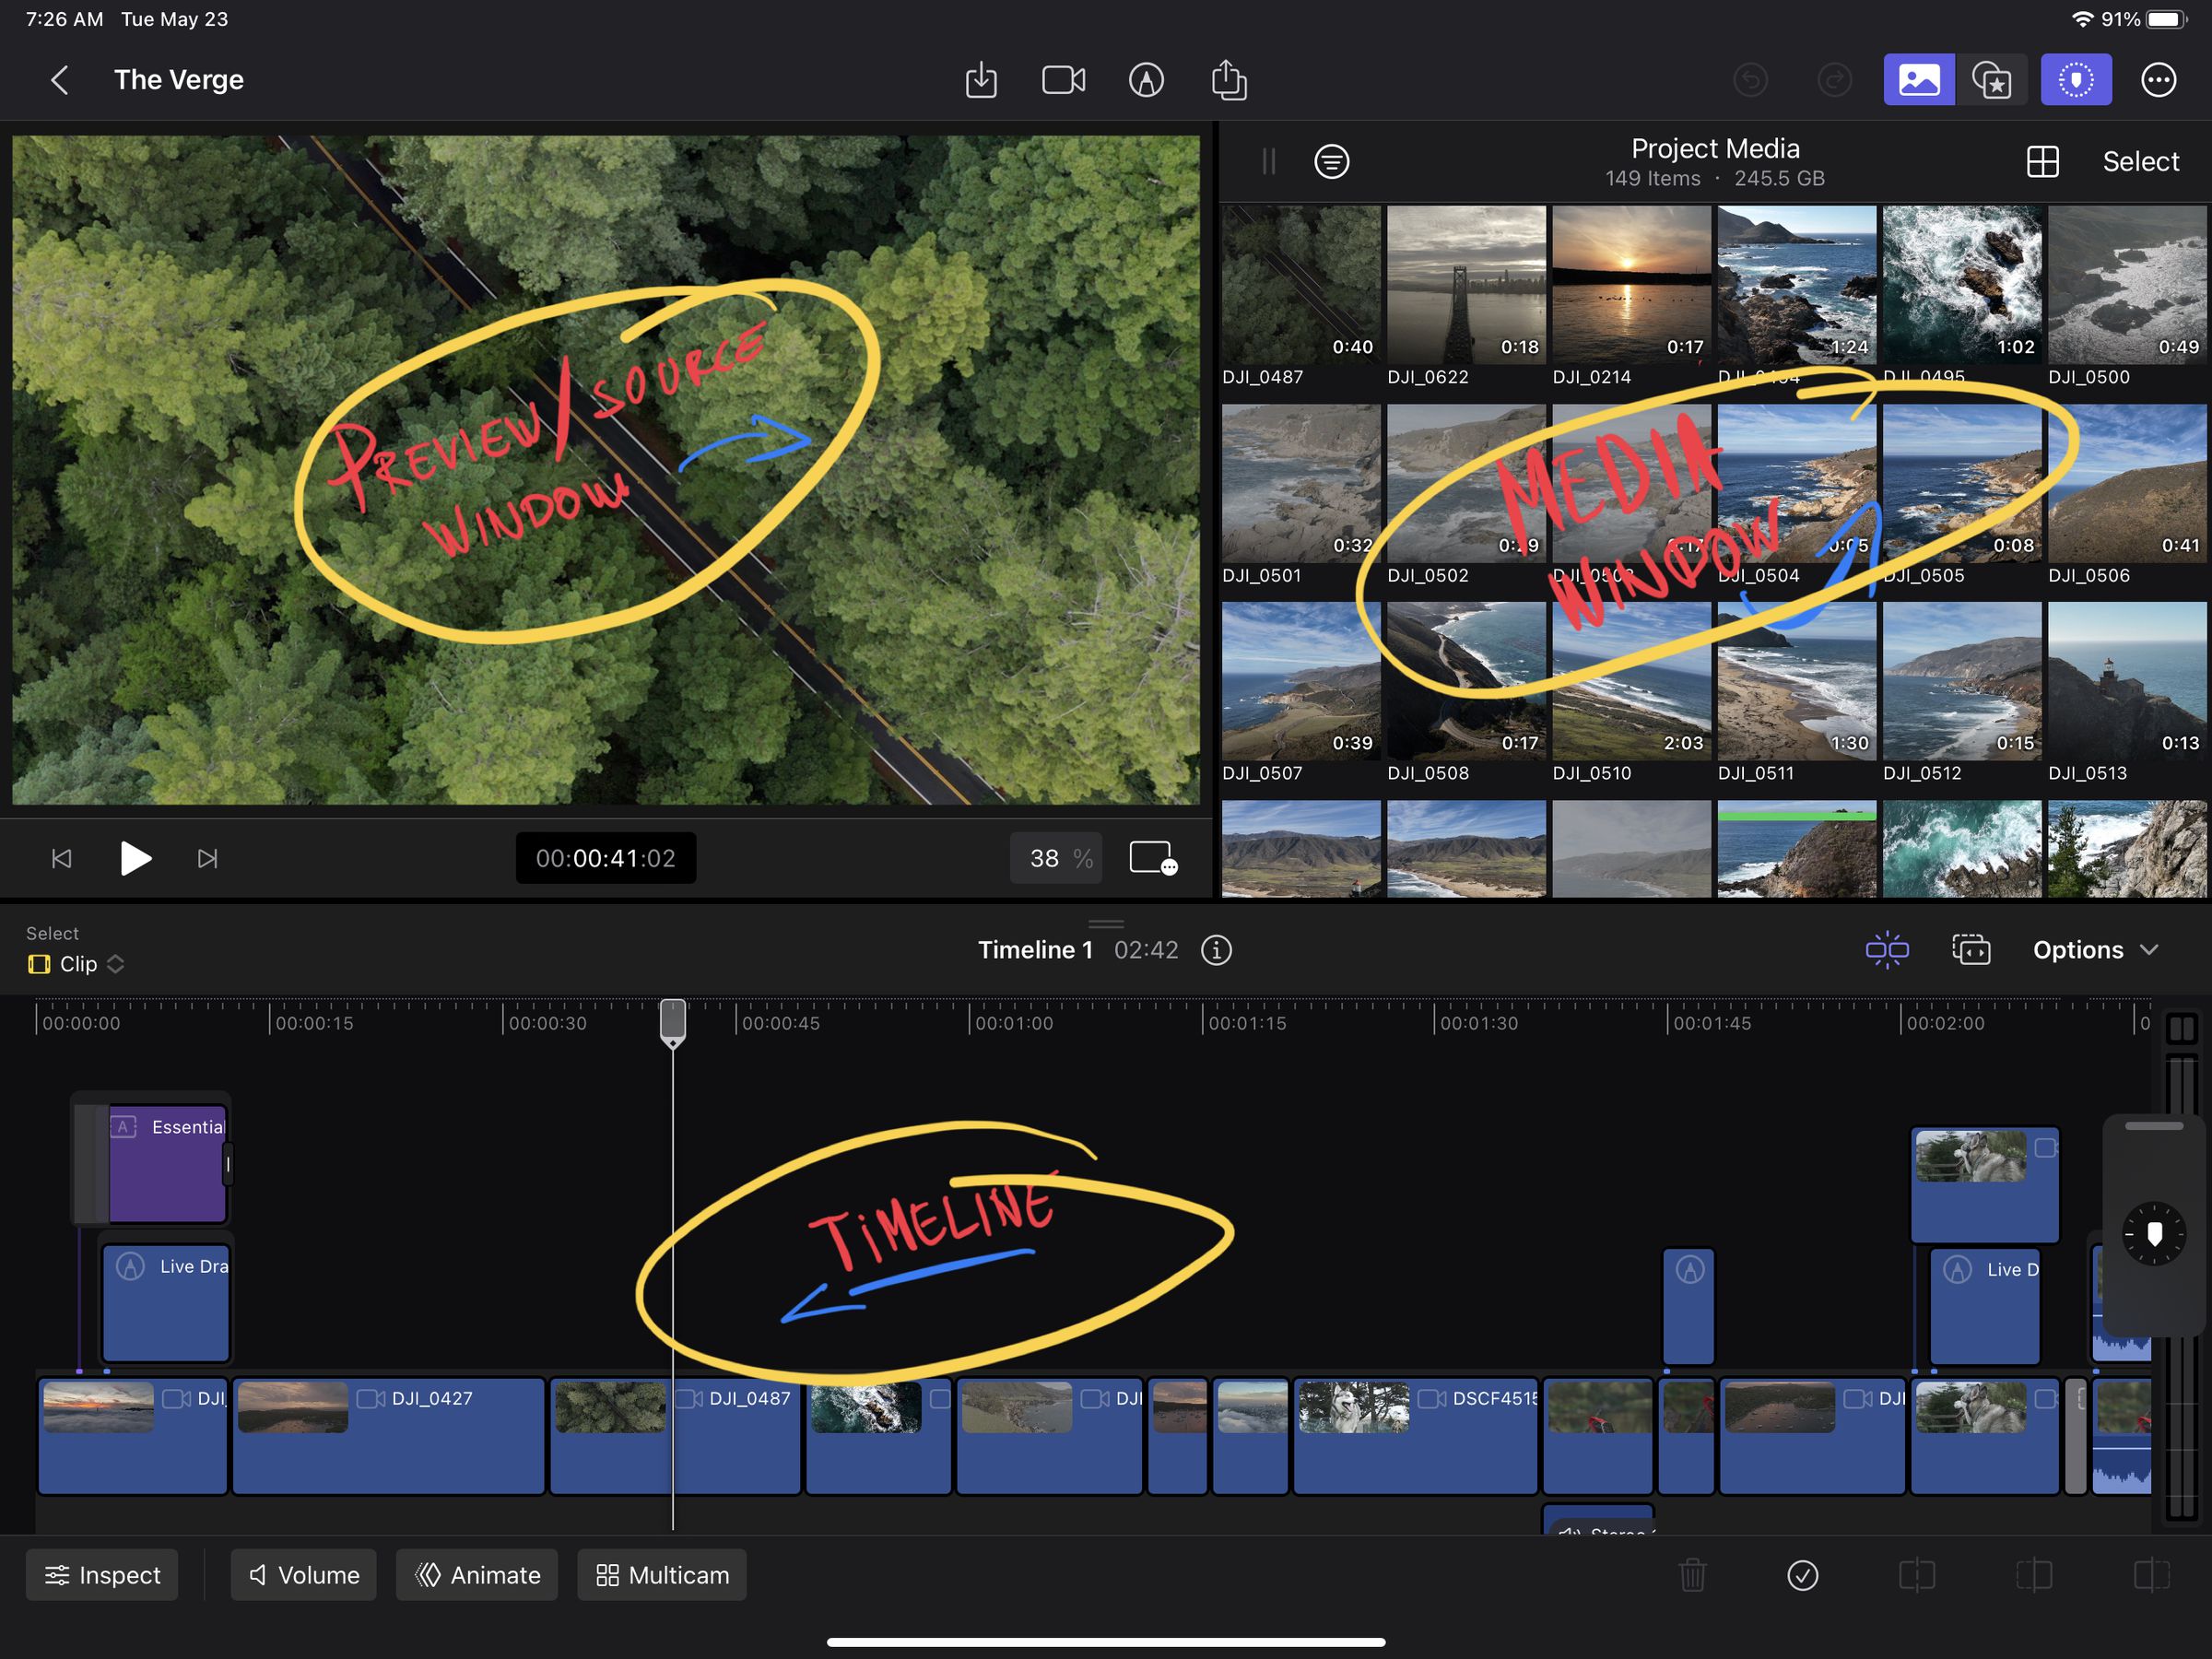 The layout looks very similar to the desktop version of Final Cut Pro.